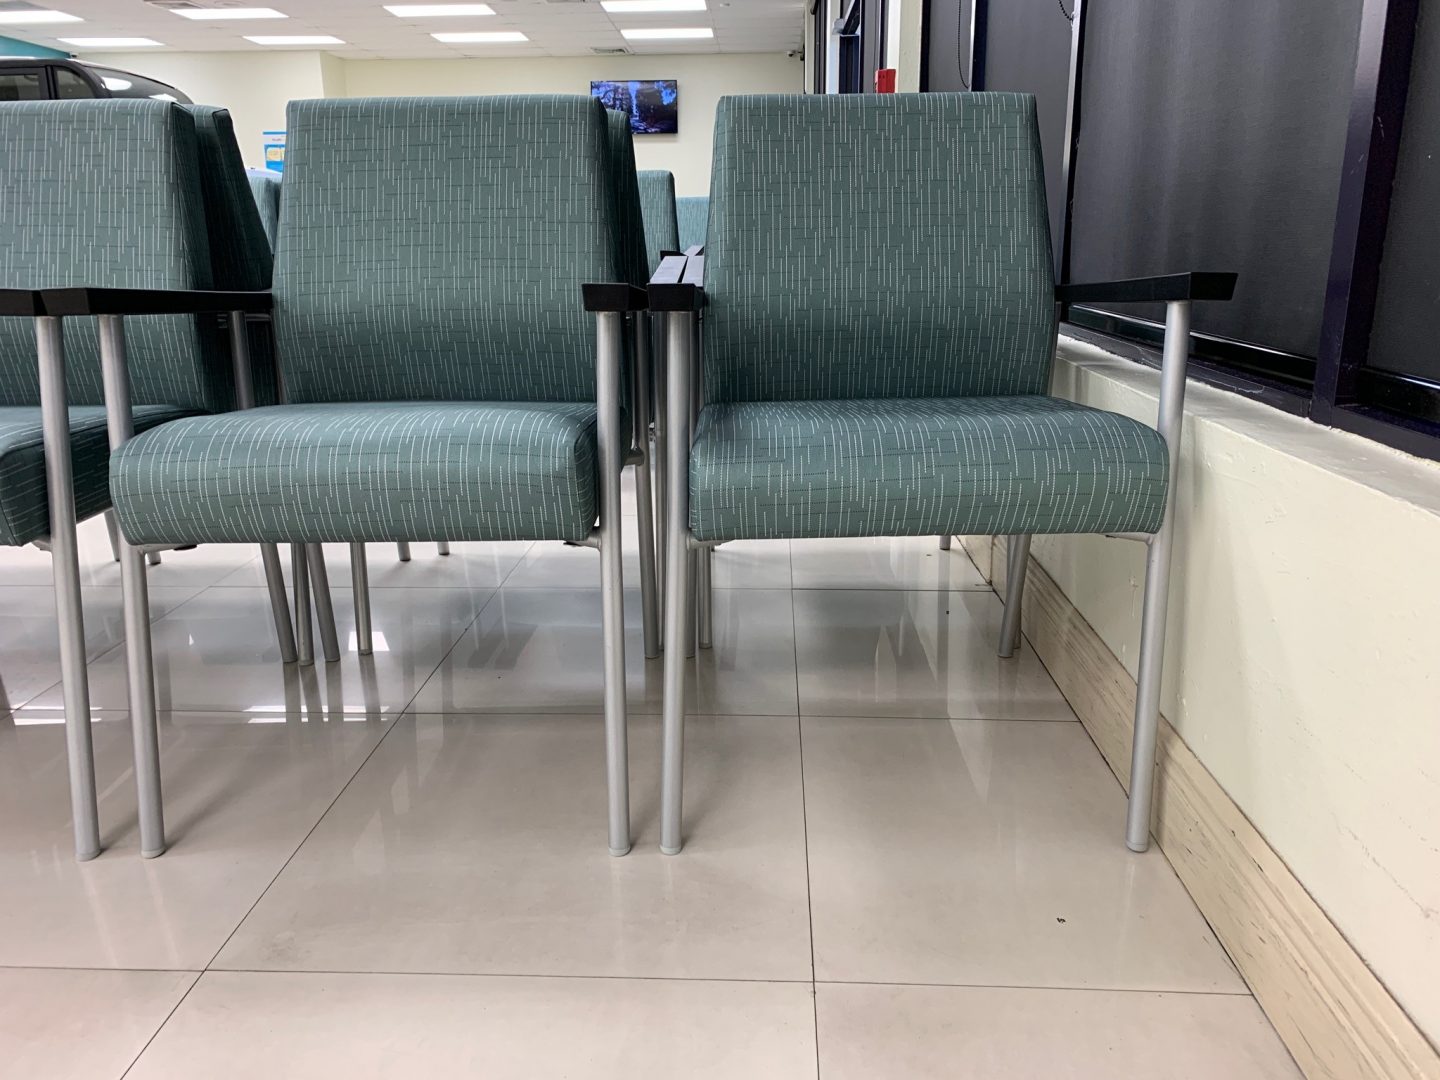 Teal chairs